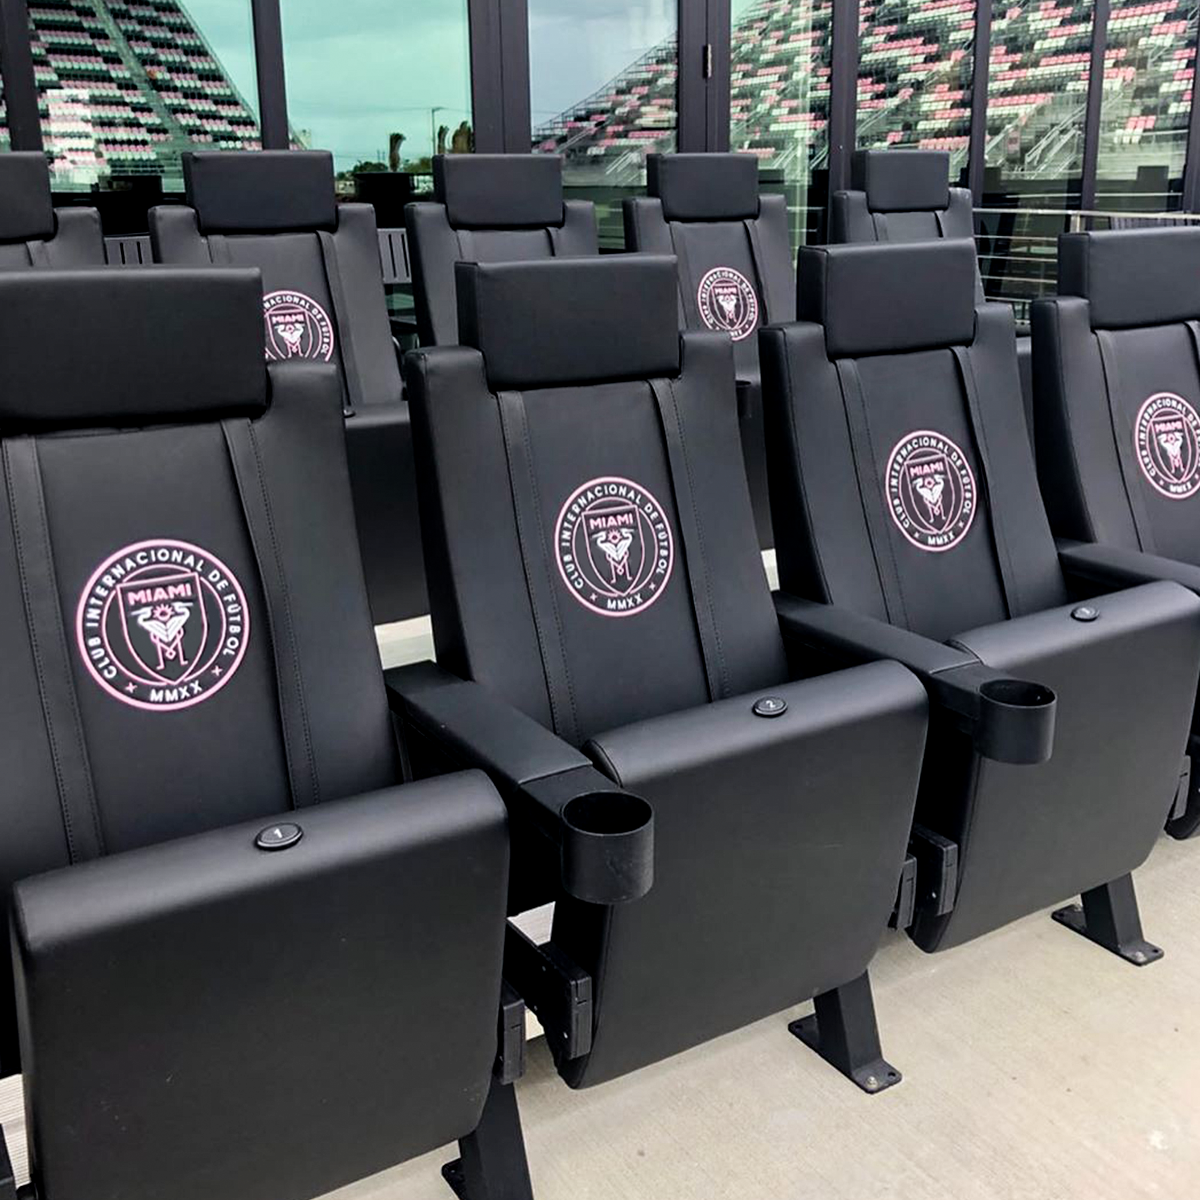 SuiteMax 3.5 VIP Seats with Boston Red Sox 2018 Champions Logo